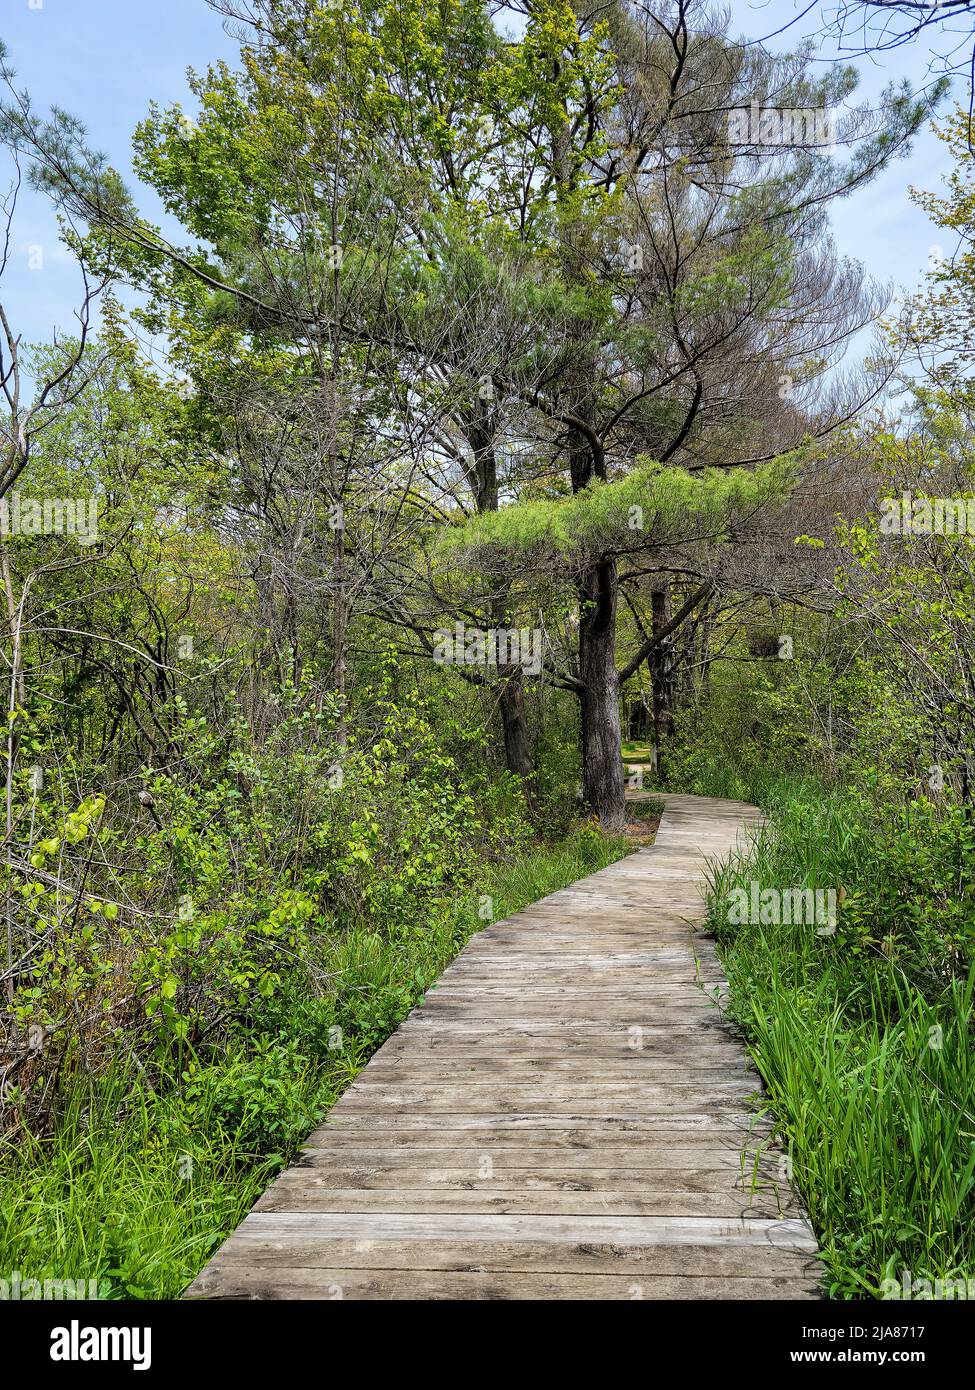 Wooden walkway in spring woods with pine trees Stock Photo